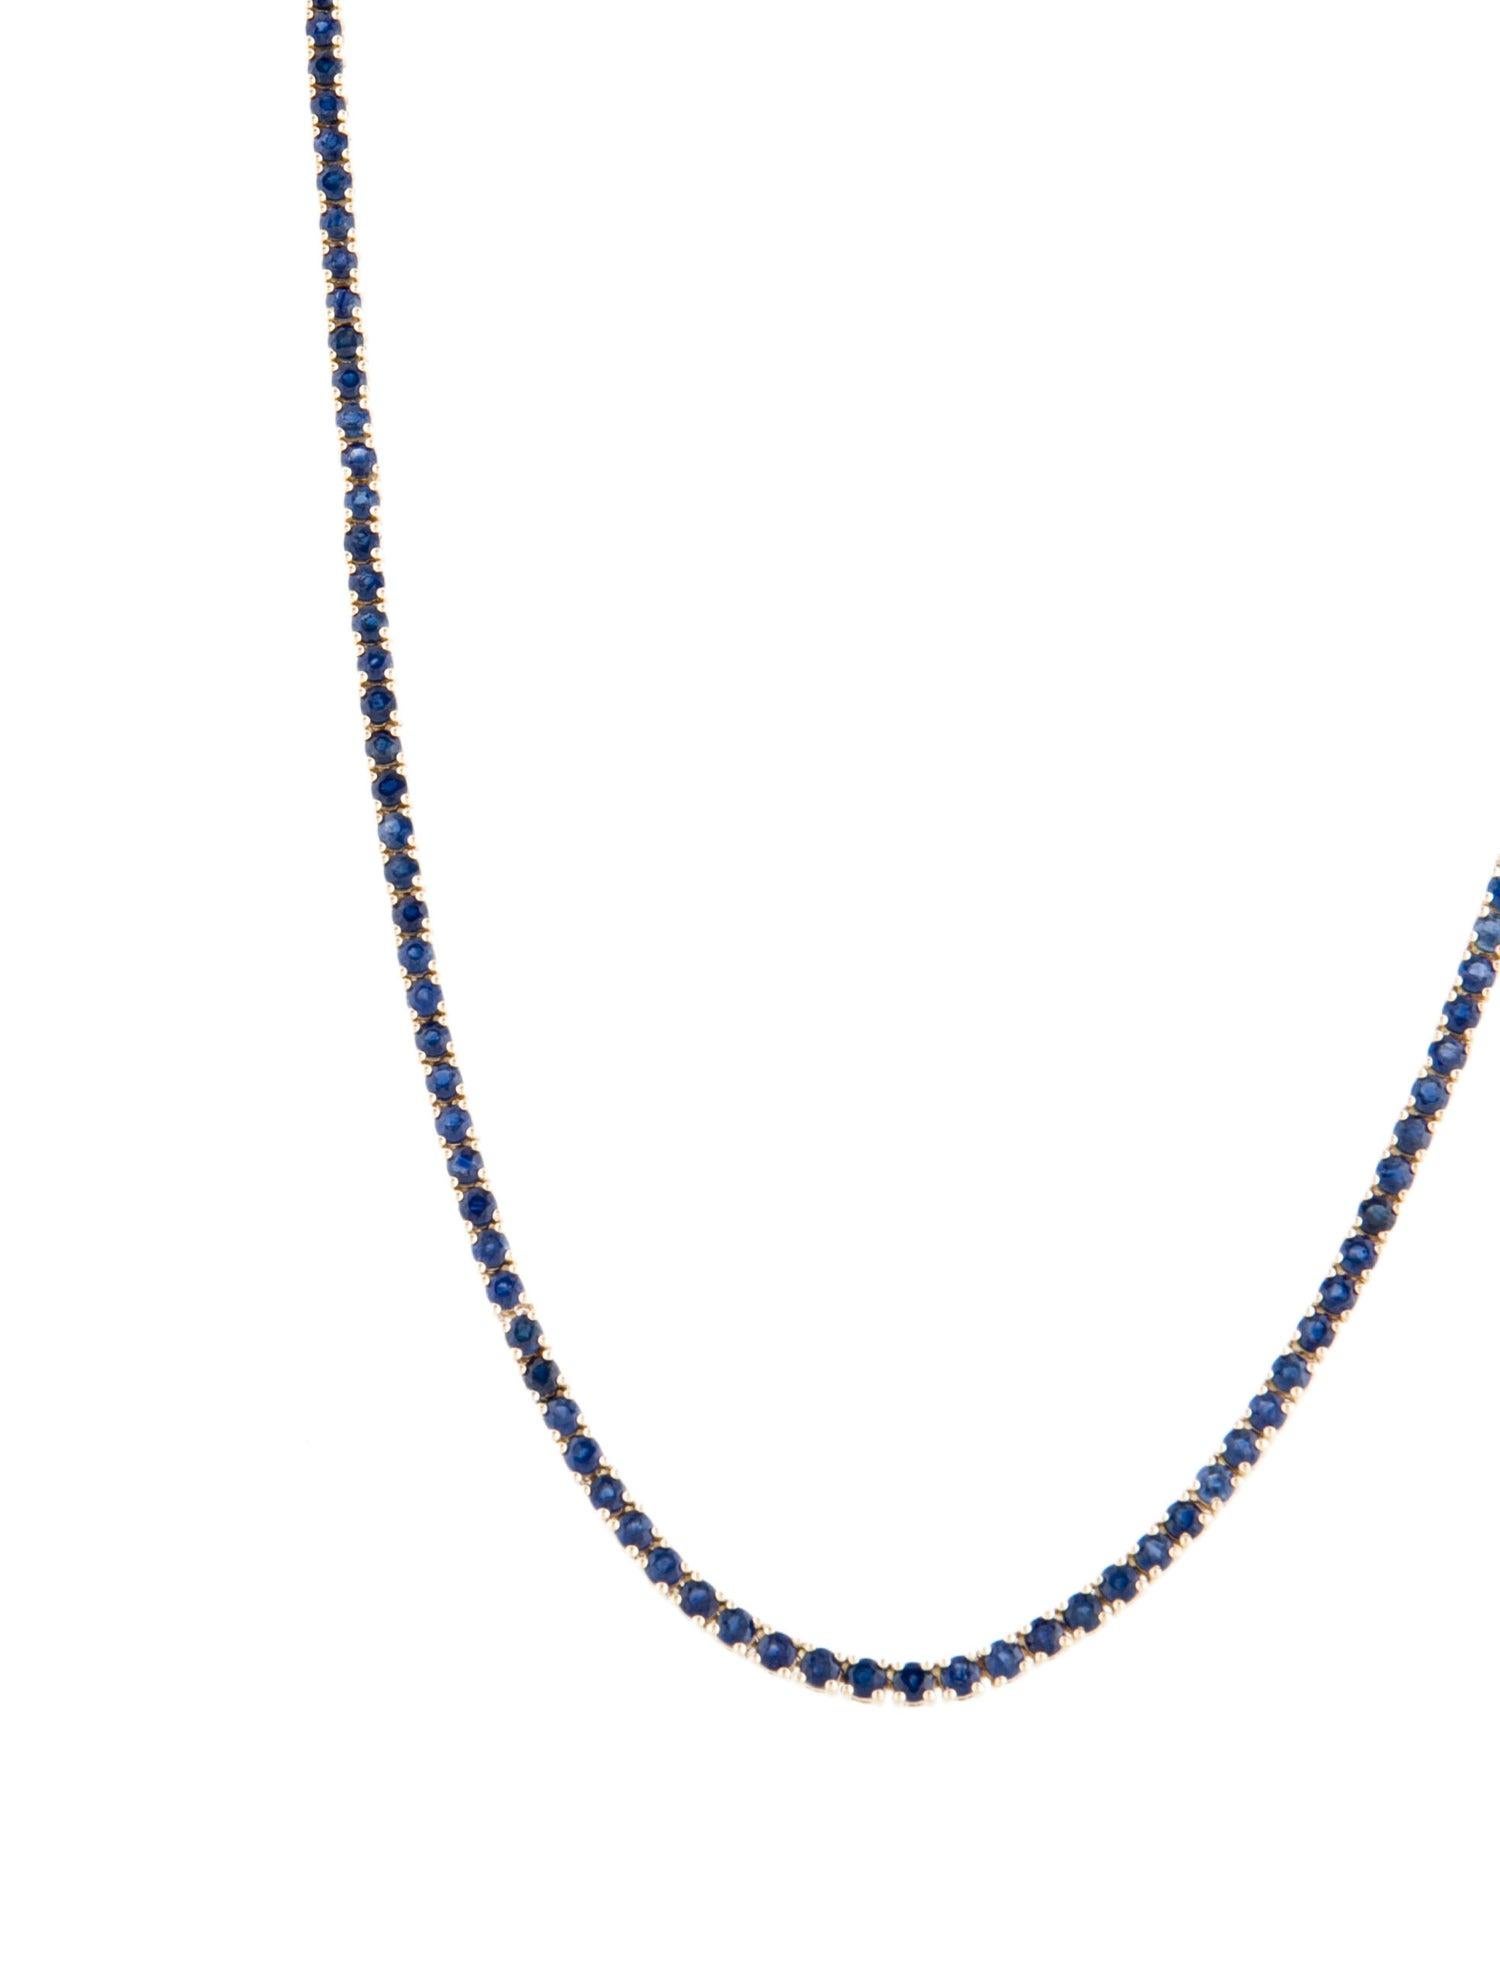 Women's 14K Sapphire Chain Necklace 15.26ctw - Exquisite & Timeless Jewelry Piece For Sale